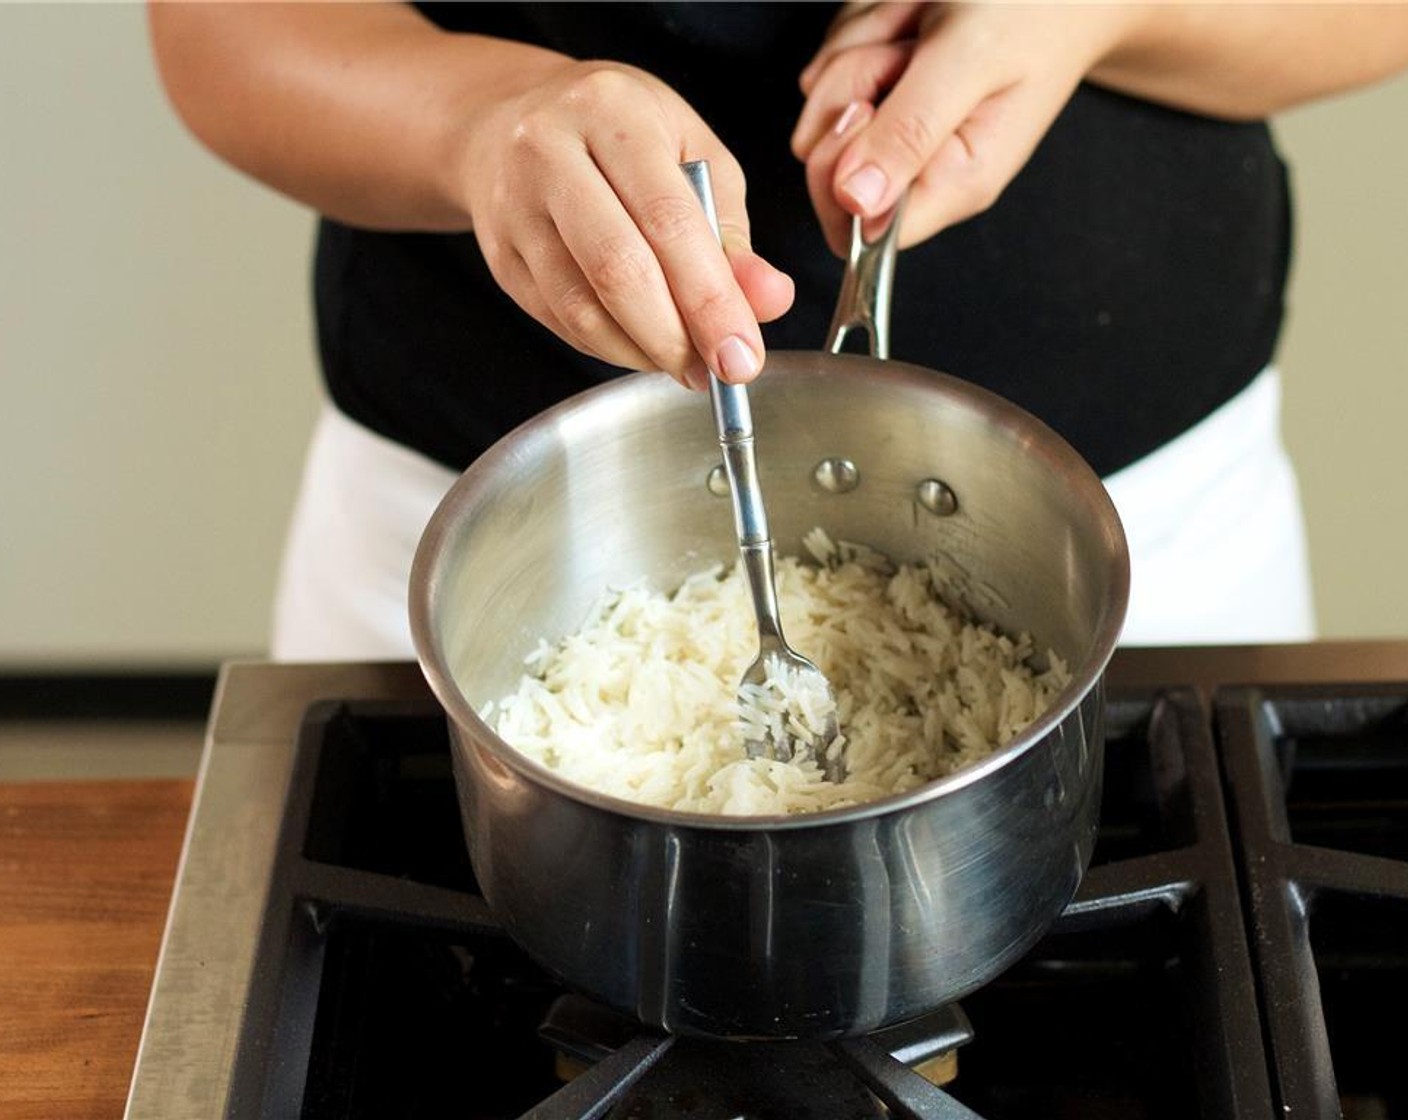 step 8 Increase heat to high and bring to a boil. Once the rice has reached a boil, reduce the heat back to medium and cover with a lid. Simmer for 20 minutes or until rice is cooked. Fluff with a fork and keep warm.